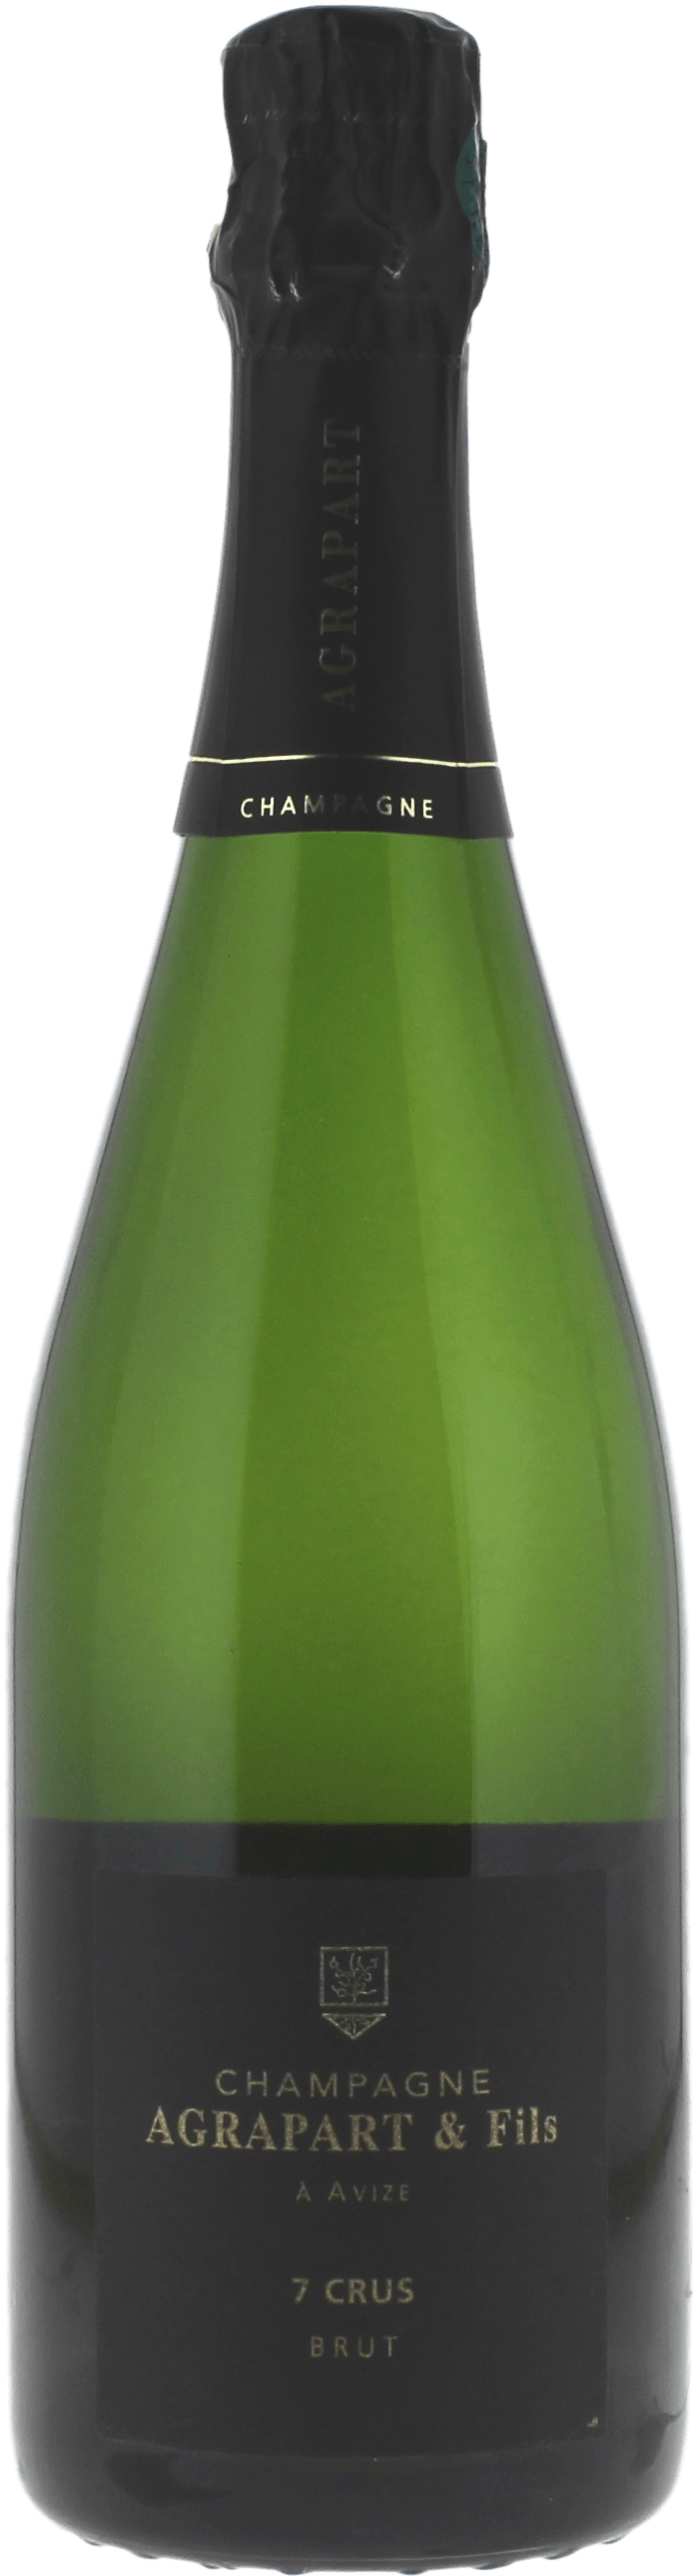 Agrapart  7 crus  Champagne, Agrapart